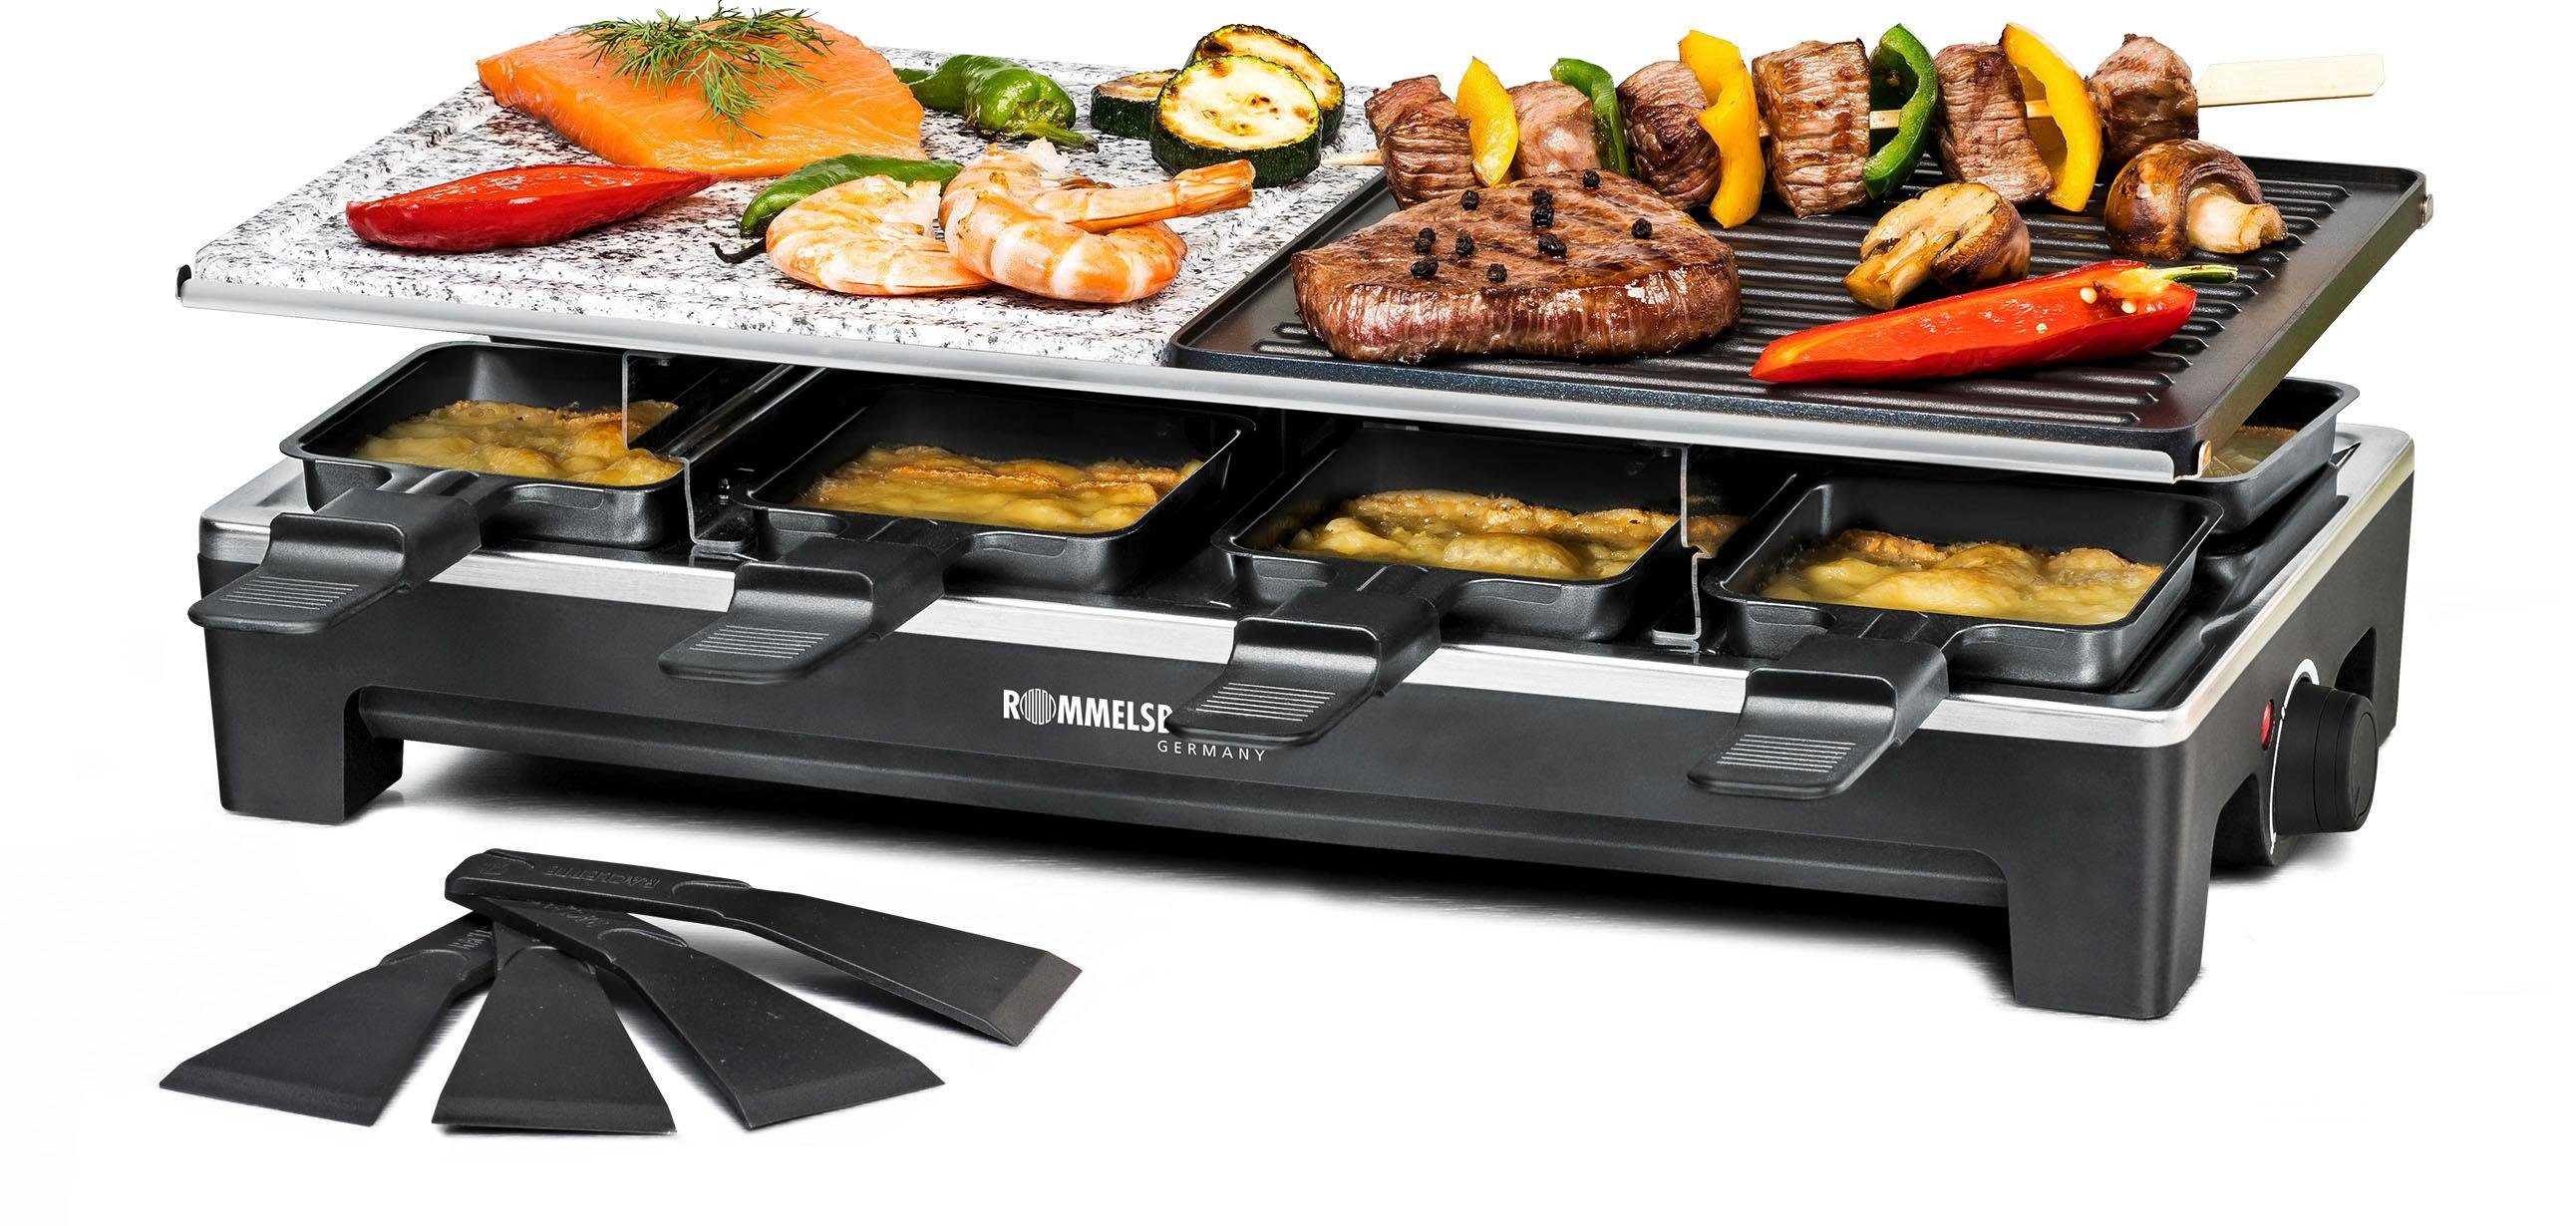 Rommelsbacher Raclette & Raclette-Grill online kaufen | OTTO